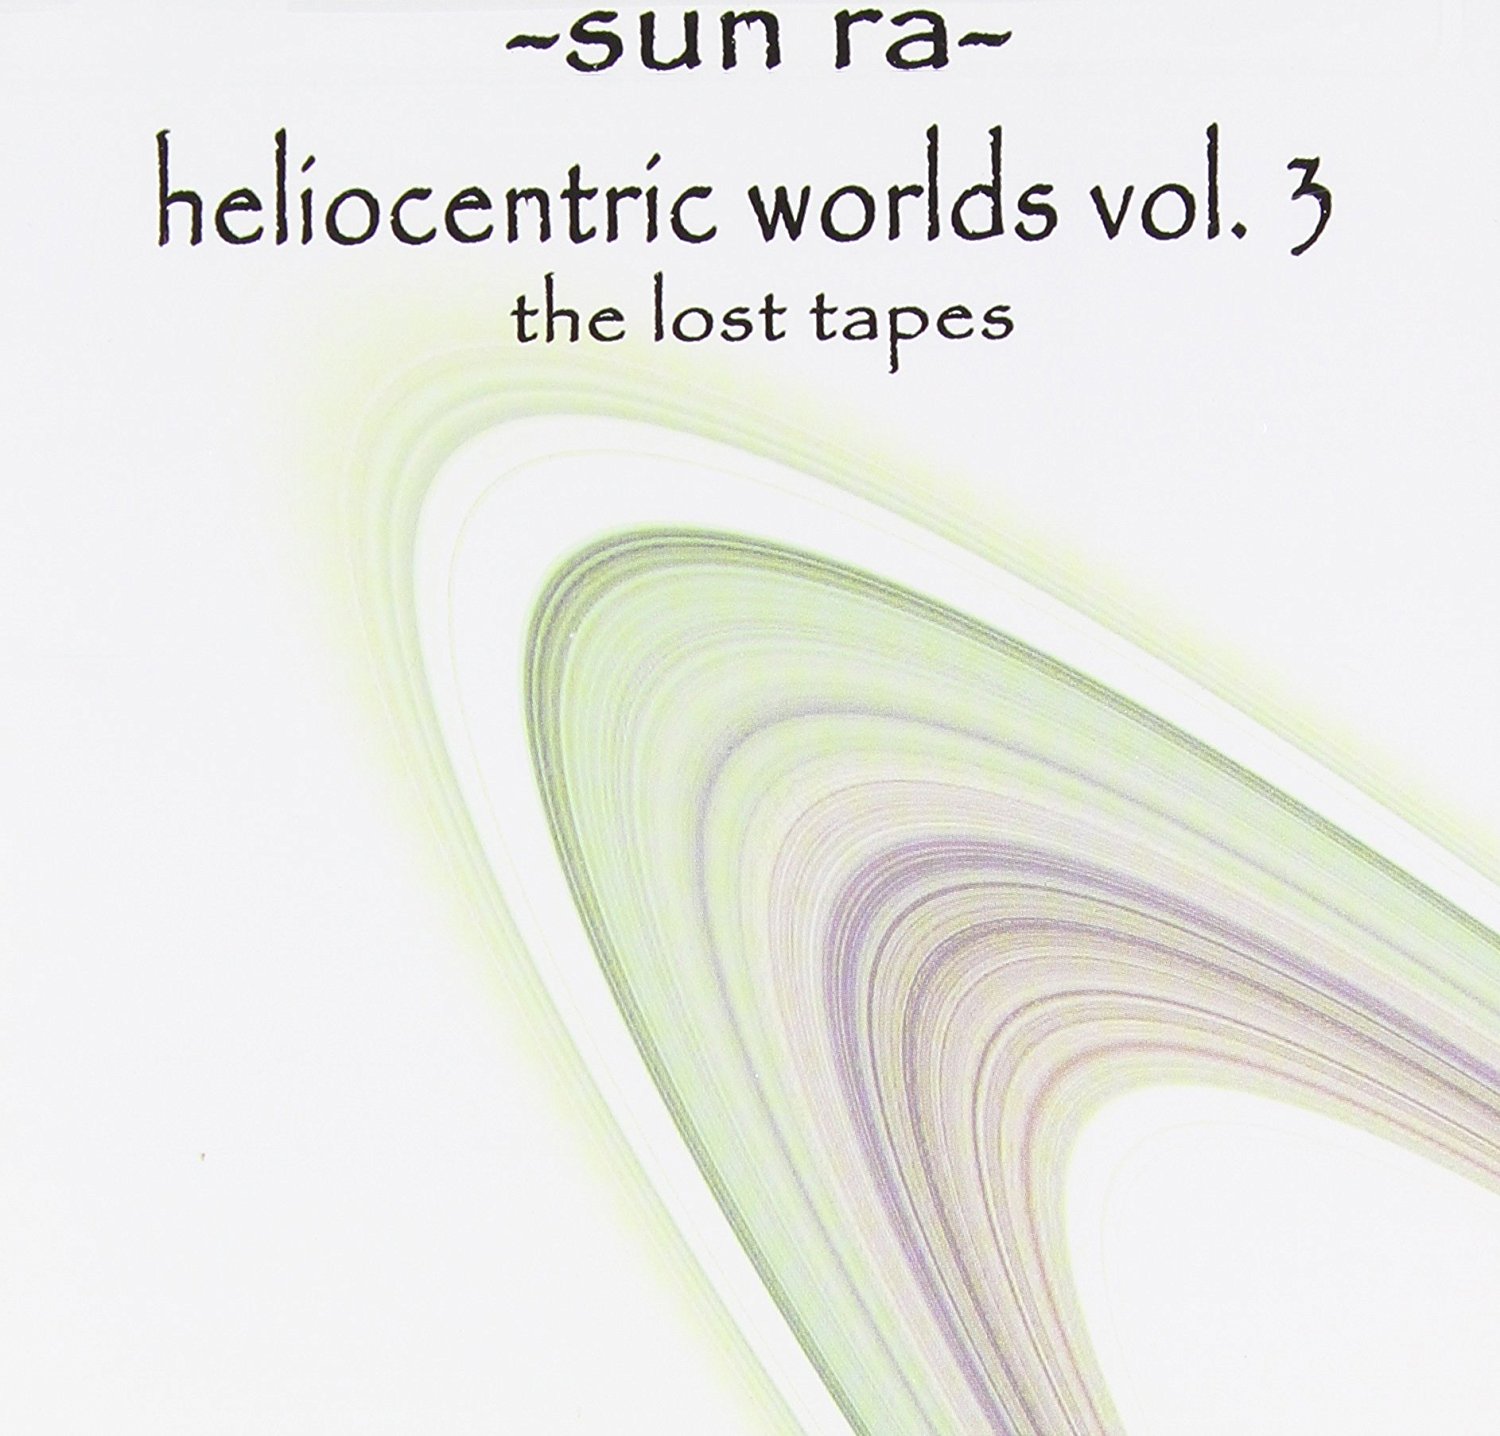 Sun Ra — Heliocentric Worlds Vol.3 - The Lost Tapes